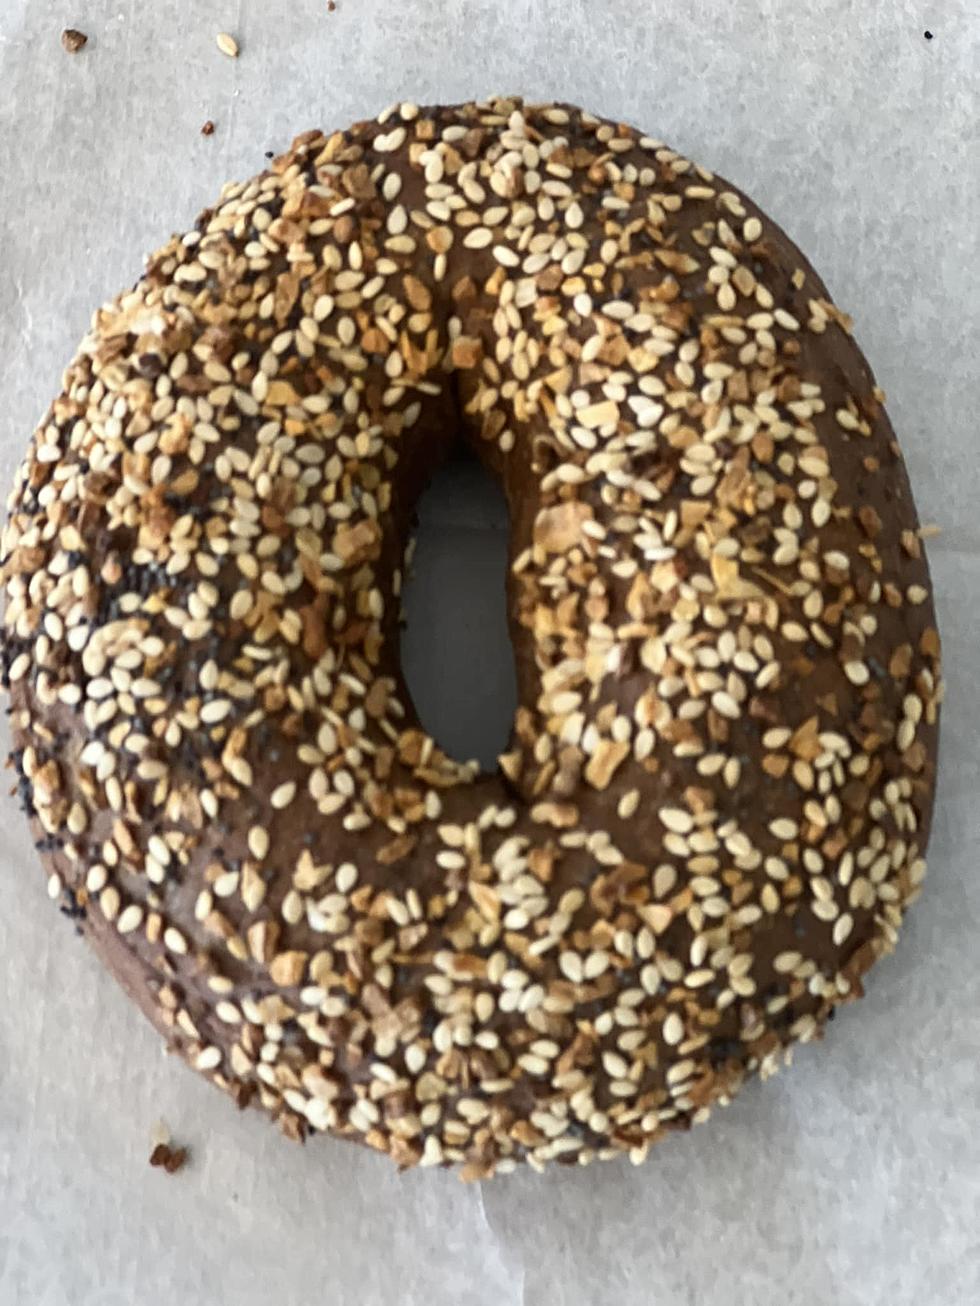 A Brand New Bagel Spot is Open in Lacey Township, NJ